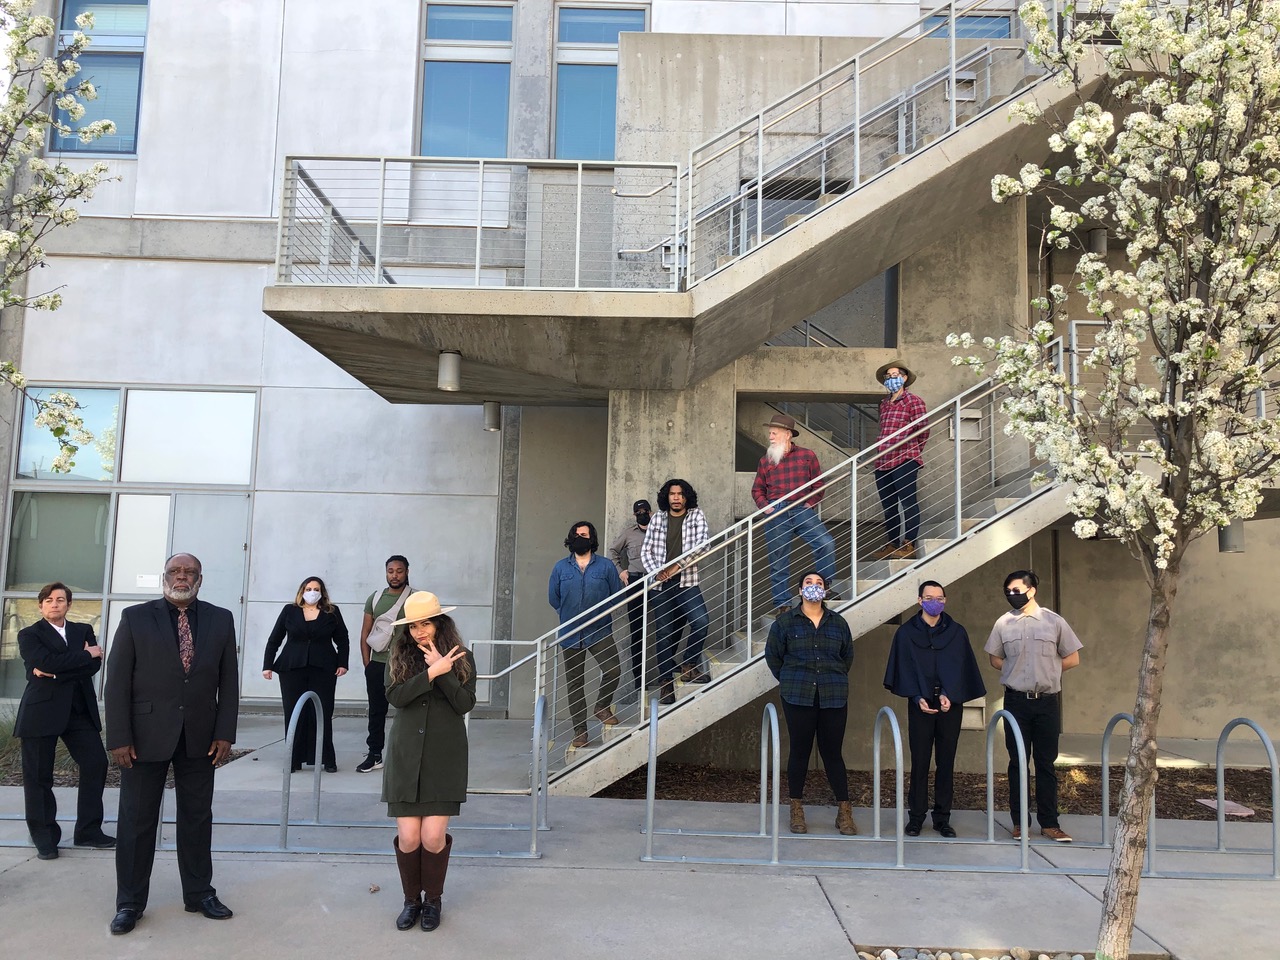 The cast of "Imogen in the Wild" poses for a photo at UC Merced.